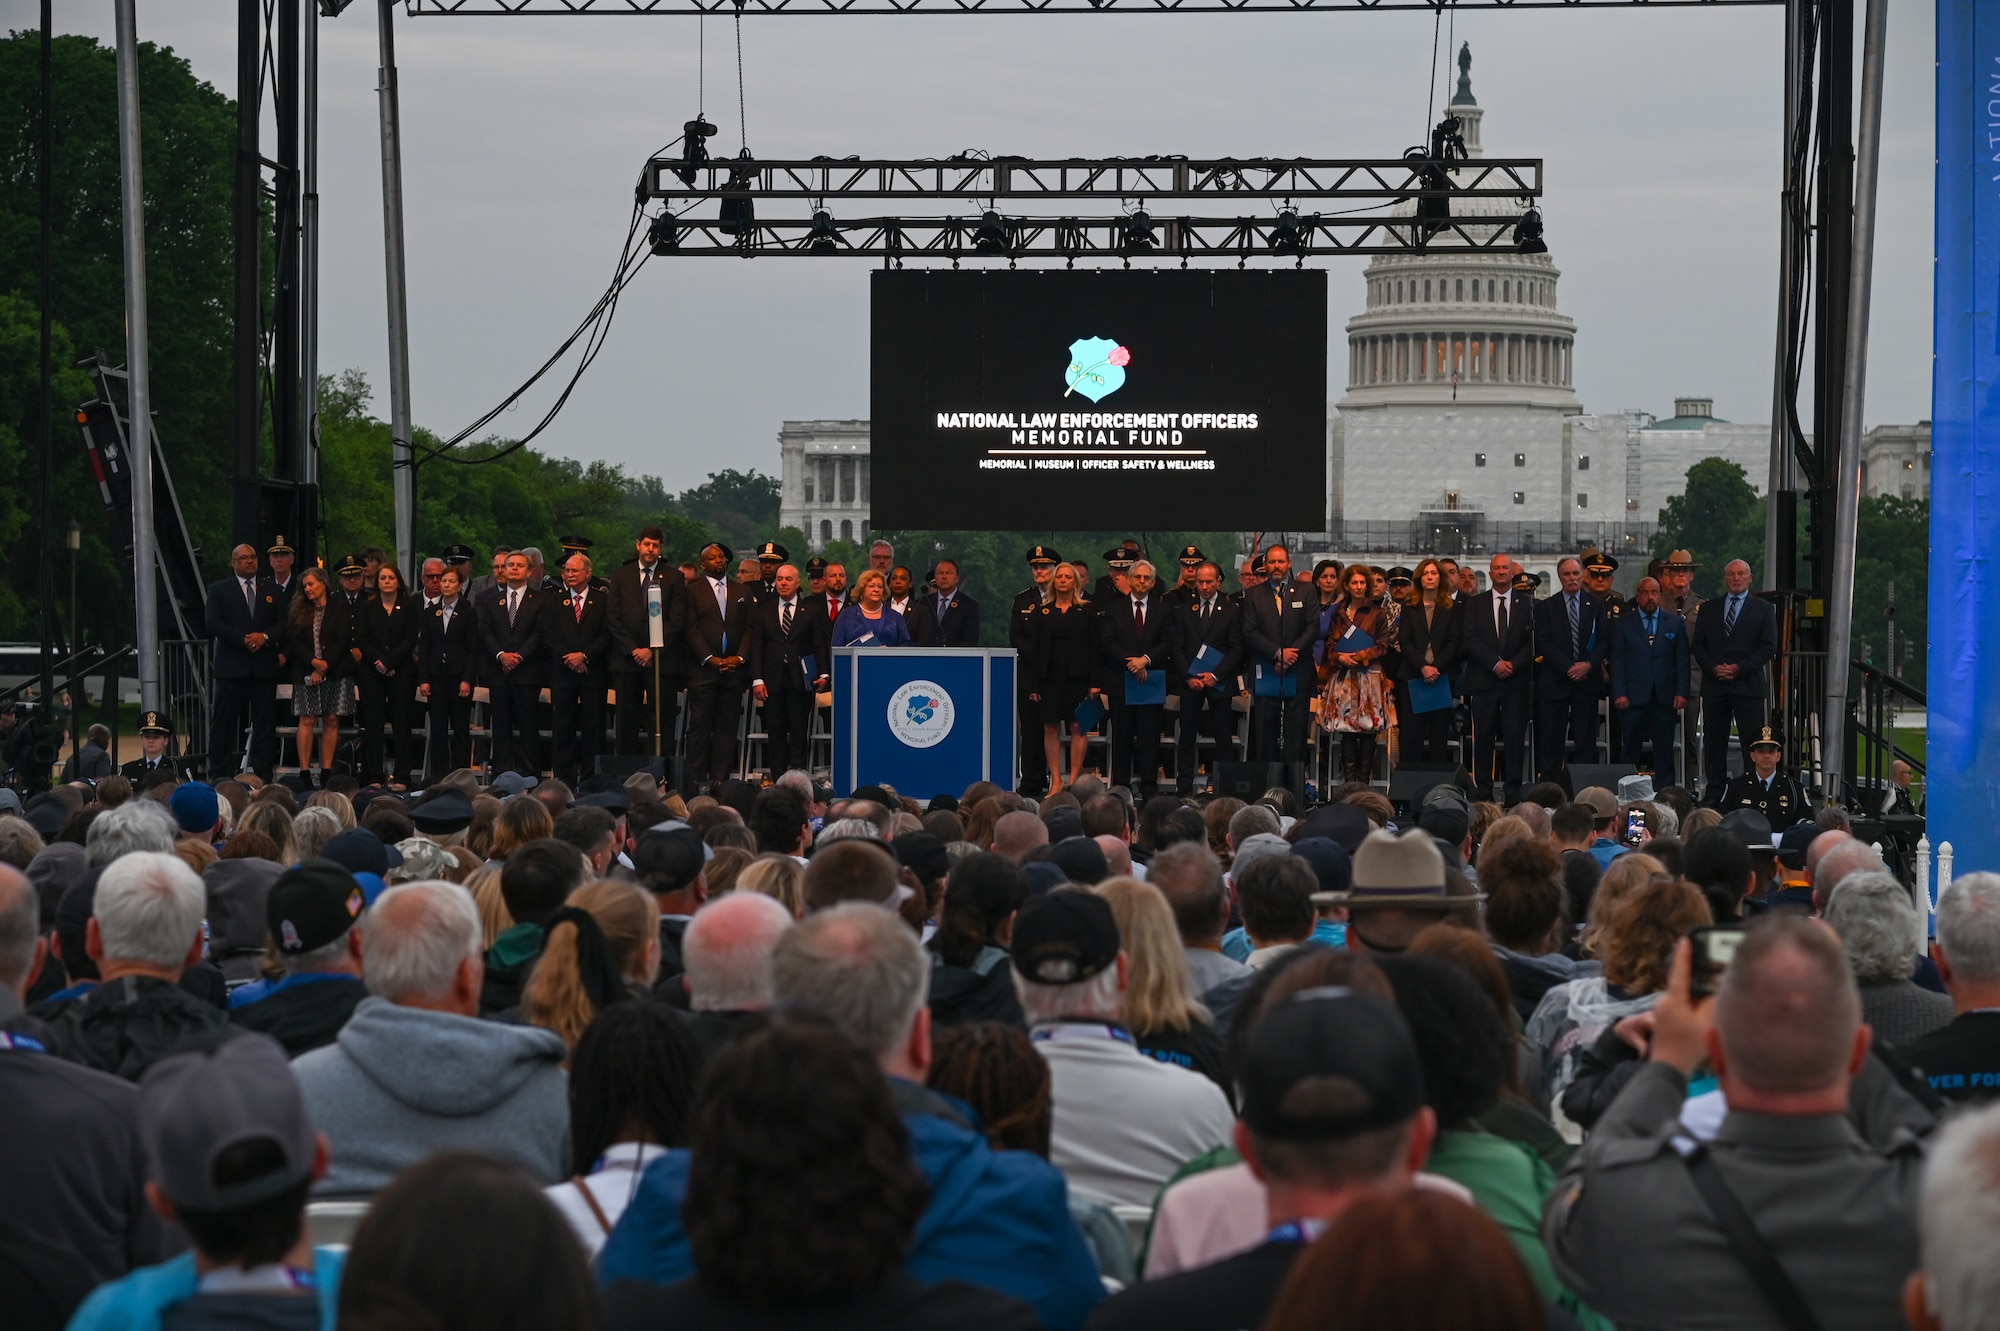 Members of the National Law Enforcement Officer Memorial Fund board and guest speakers stand at the 35th annual candlelight vigil at the National Mall in Washington, D.C. May 13, 2023. The vigil recognized law enforcement officers killed in the line of duty whose names were dedicated on the National Law Enforcement Memorial in Washington, D.C. Five hundred and fifty-six names were read aloud in front of a crowd of thousands. (U.S. Air Force photo by Abigail Meyer)